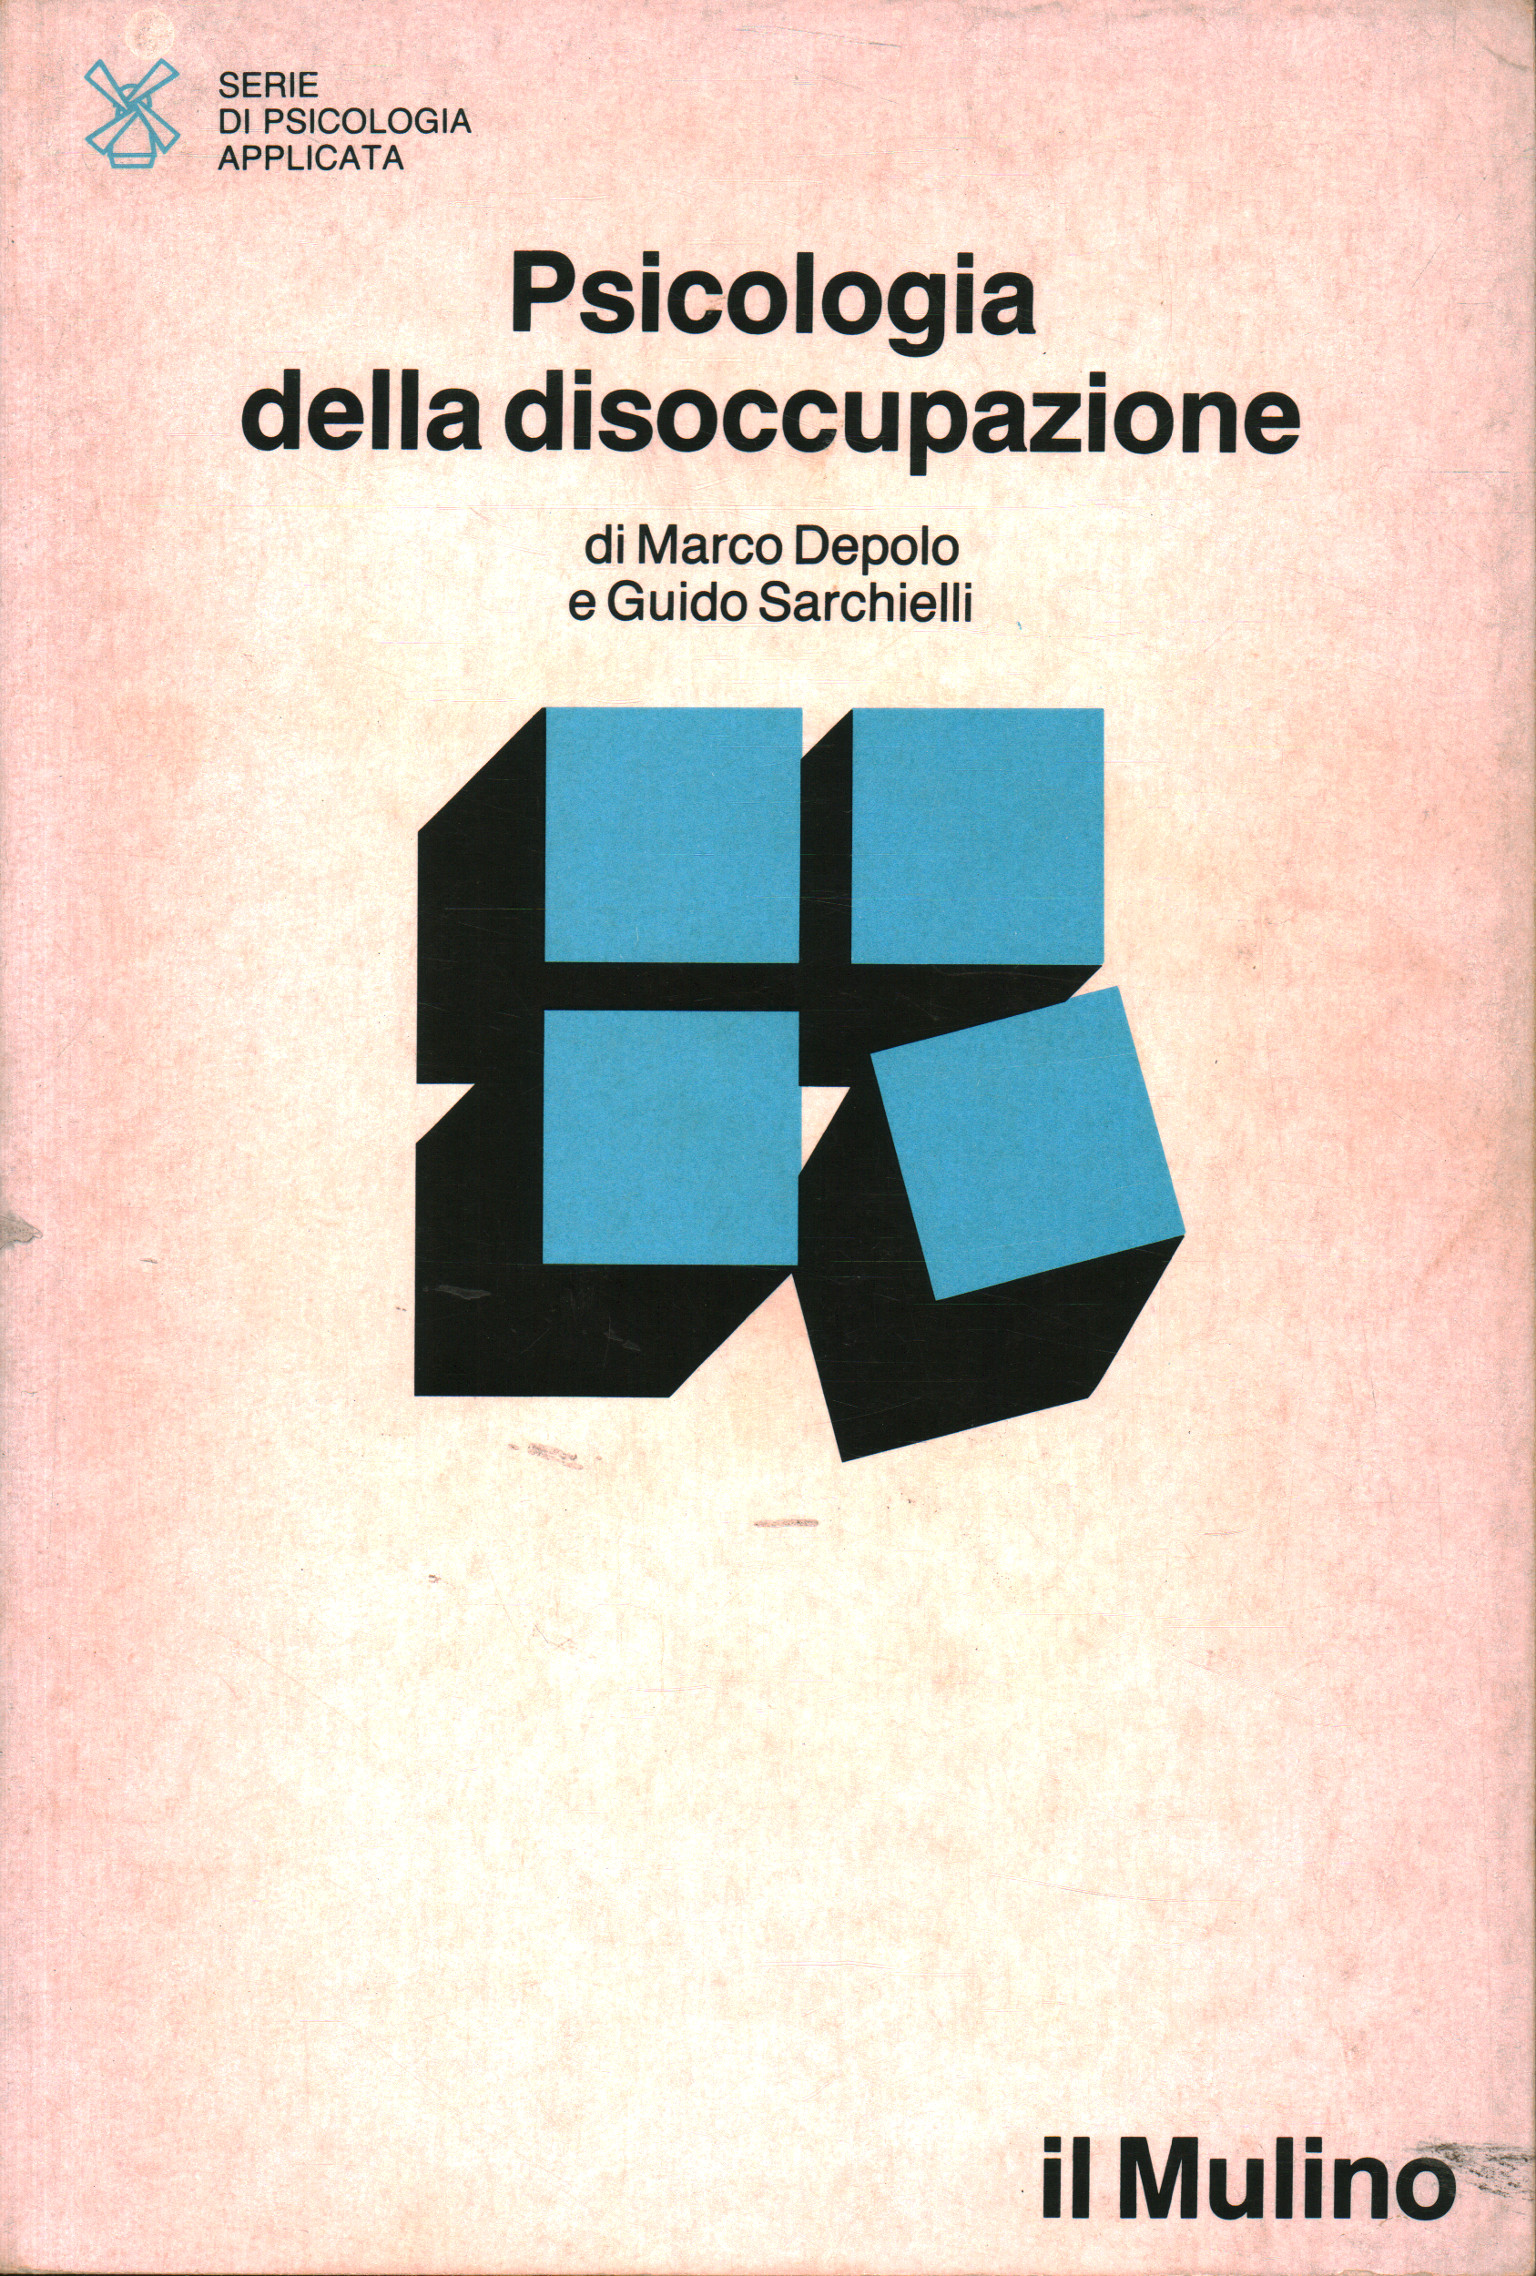 The psychology of unemployment, Marco Depolo, Guido Sarchielli